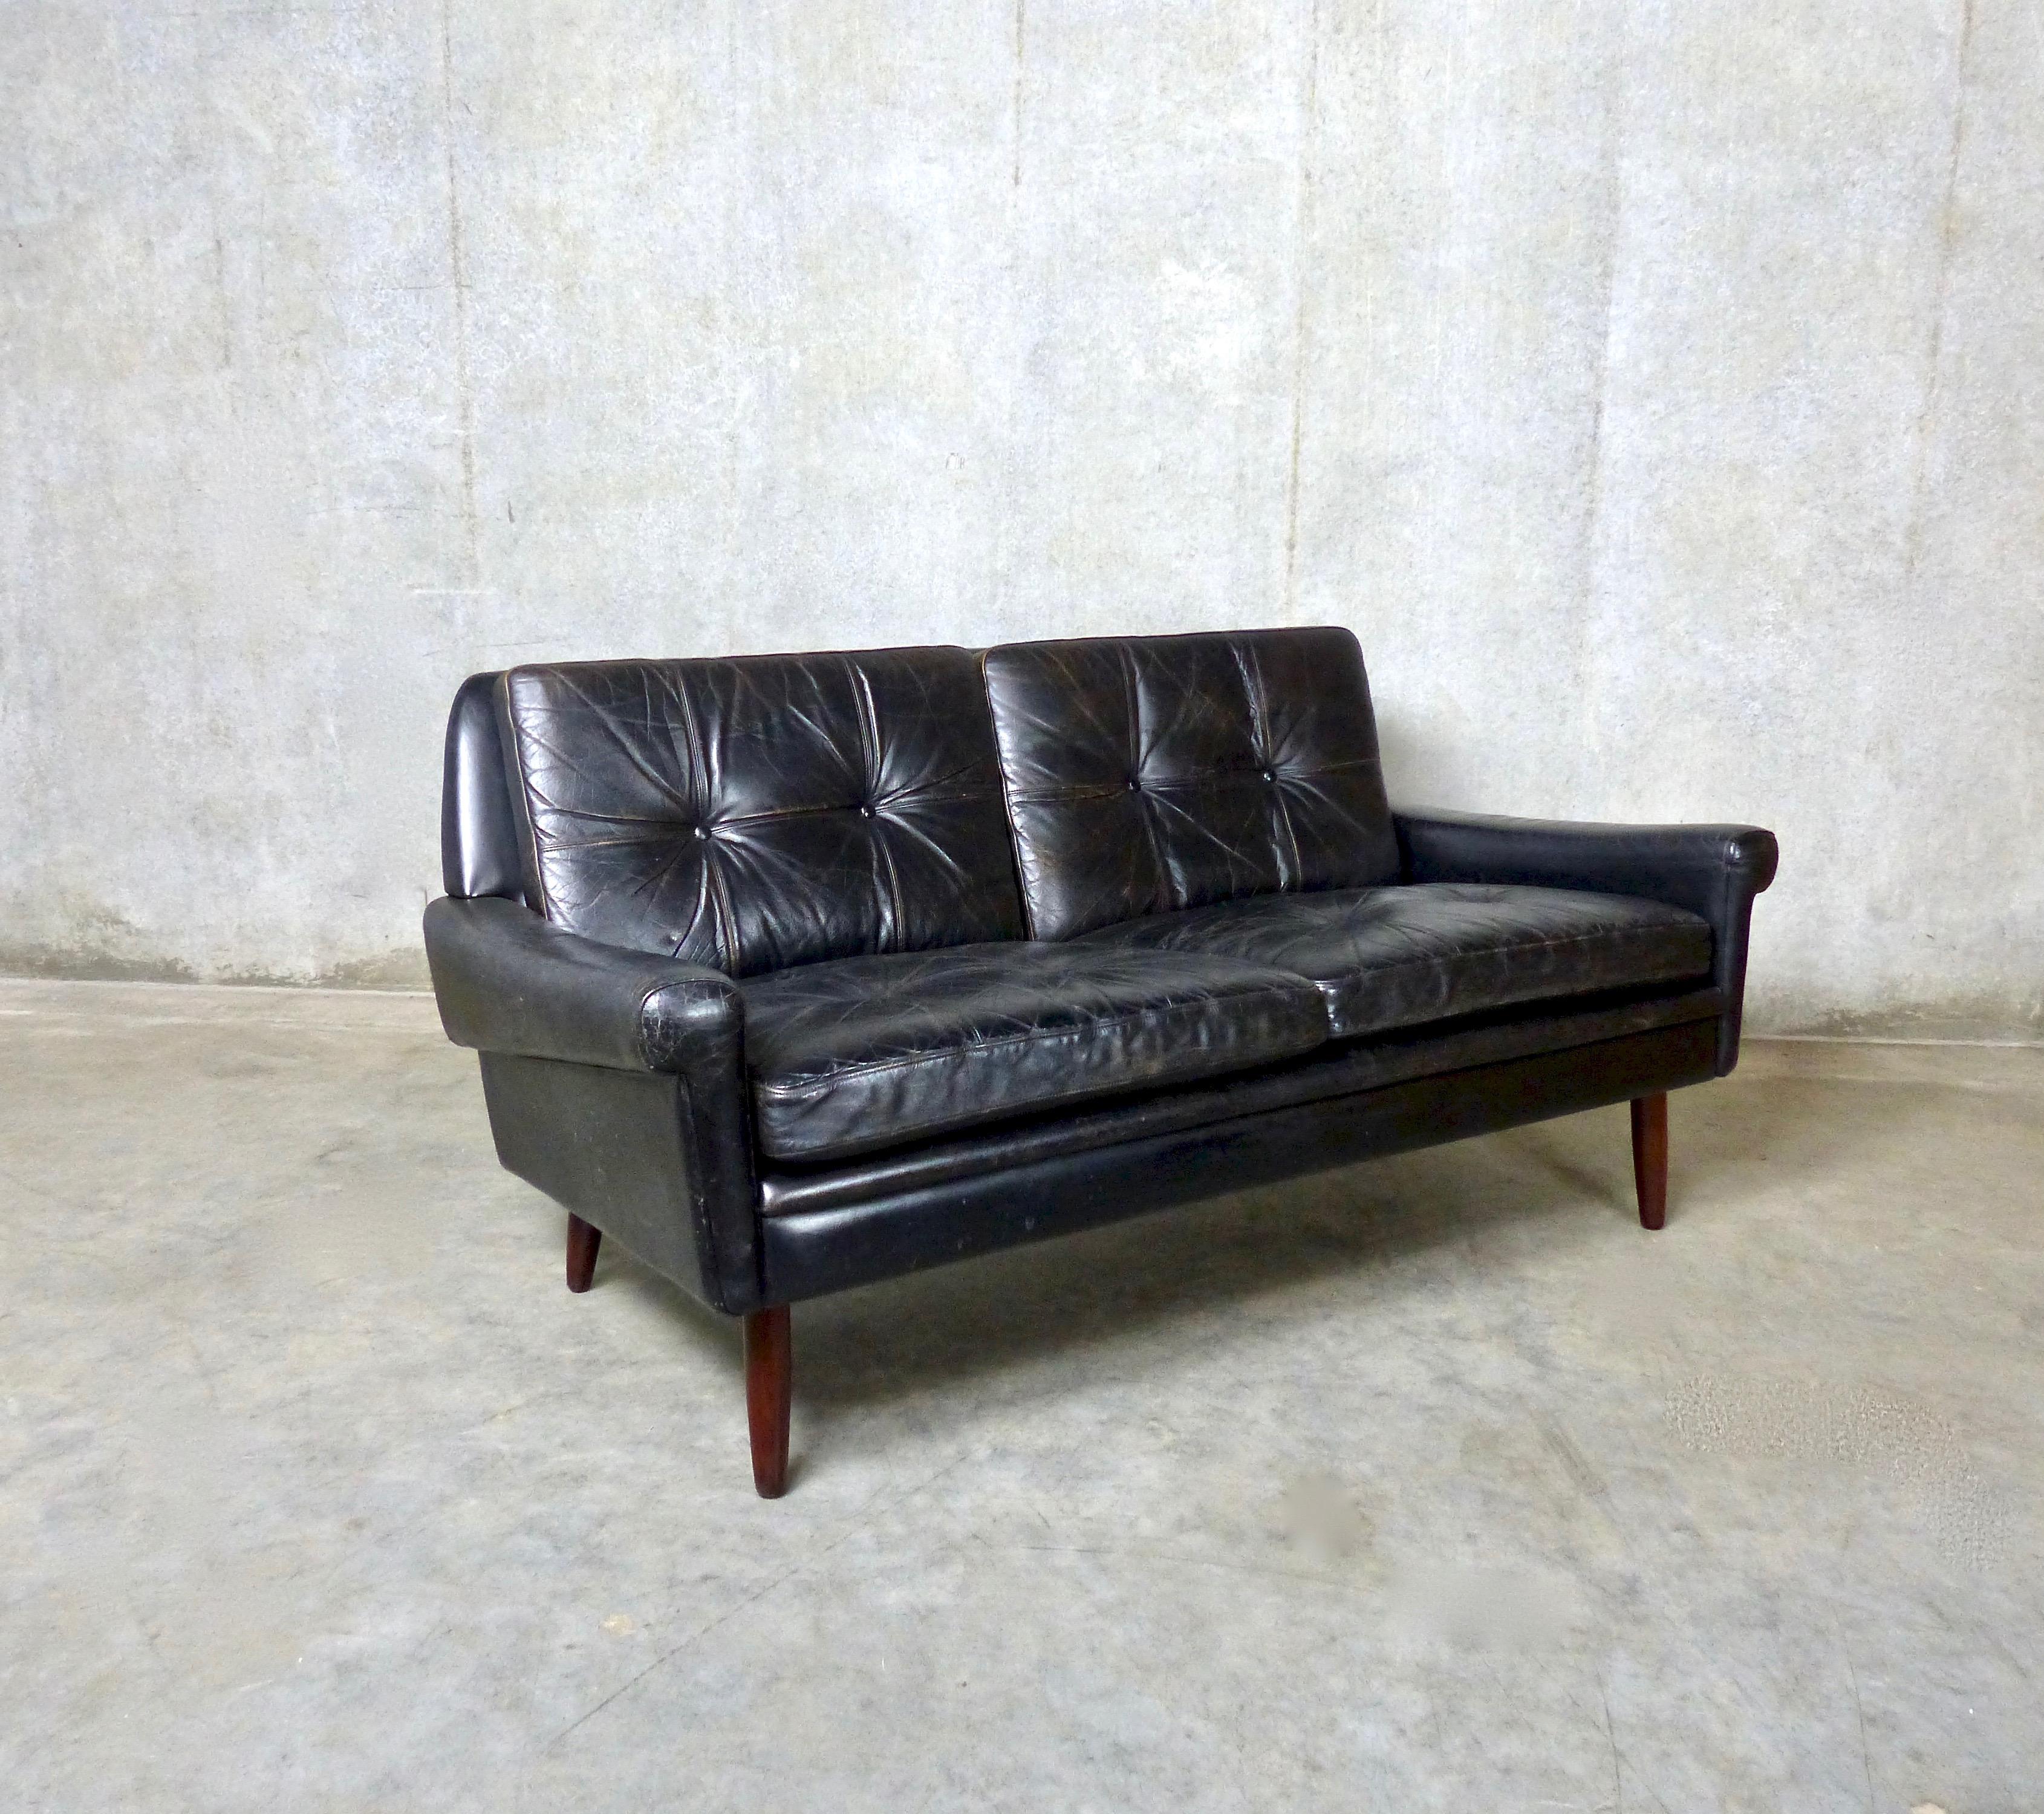 A tufted, black leather, two-seat sofa designed by Svend Skipper in the 1960s and made by Skipper Mobler in Denmark. This compact but luxurious sofa, in original leather, sits on rosewood tapered legs. A Classic Mid-Century Modern